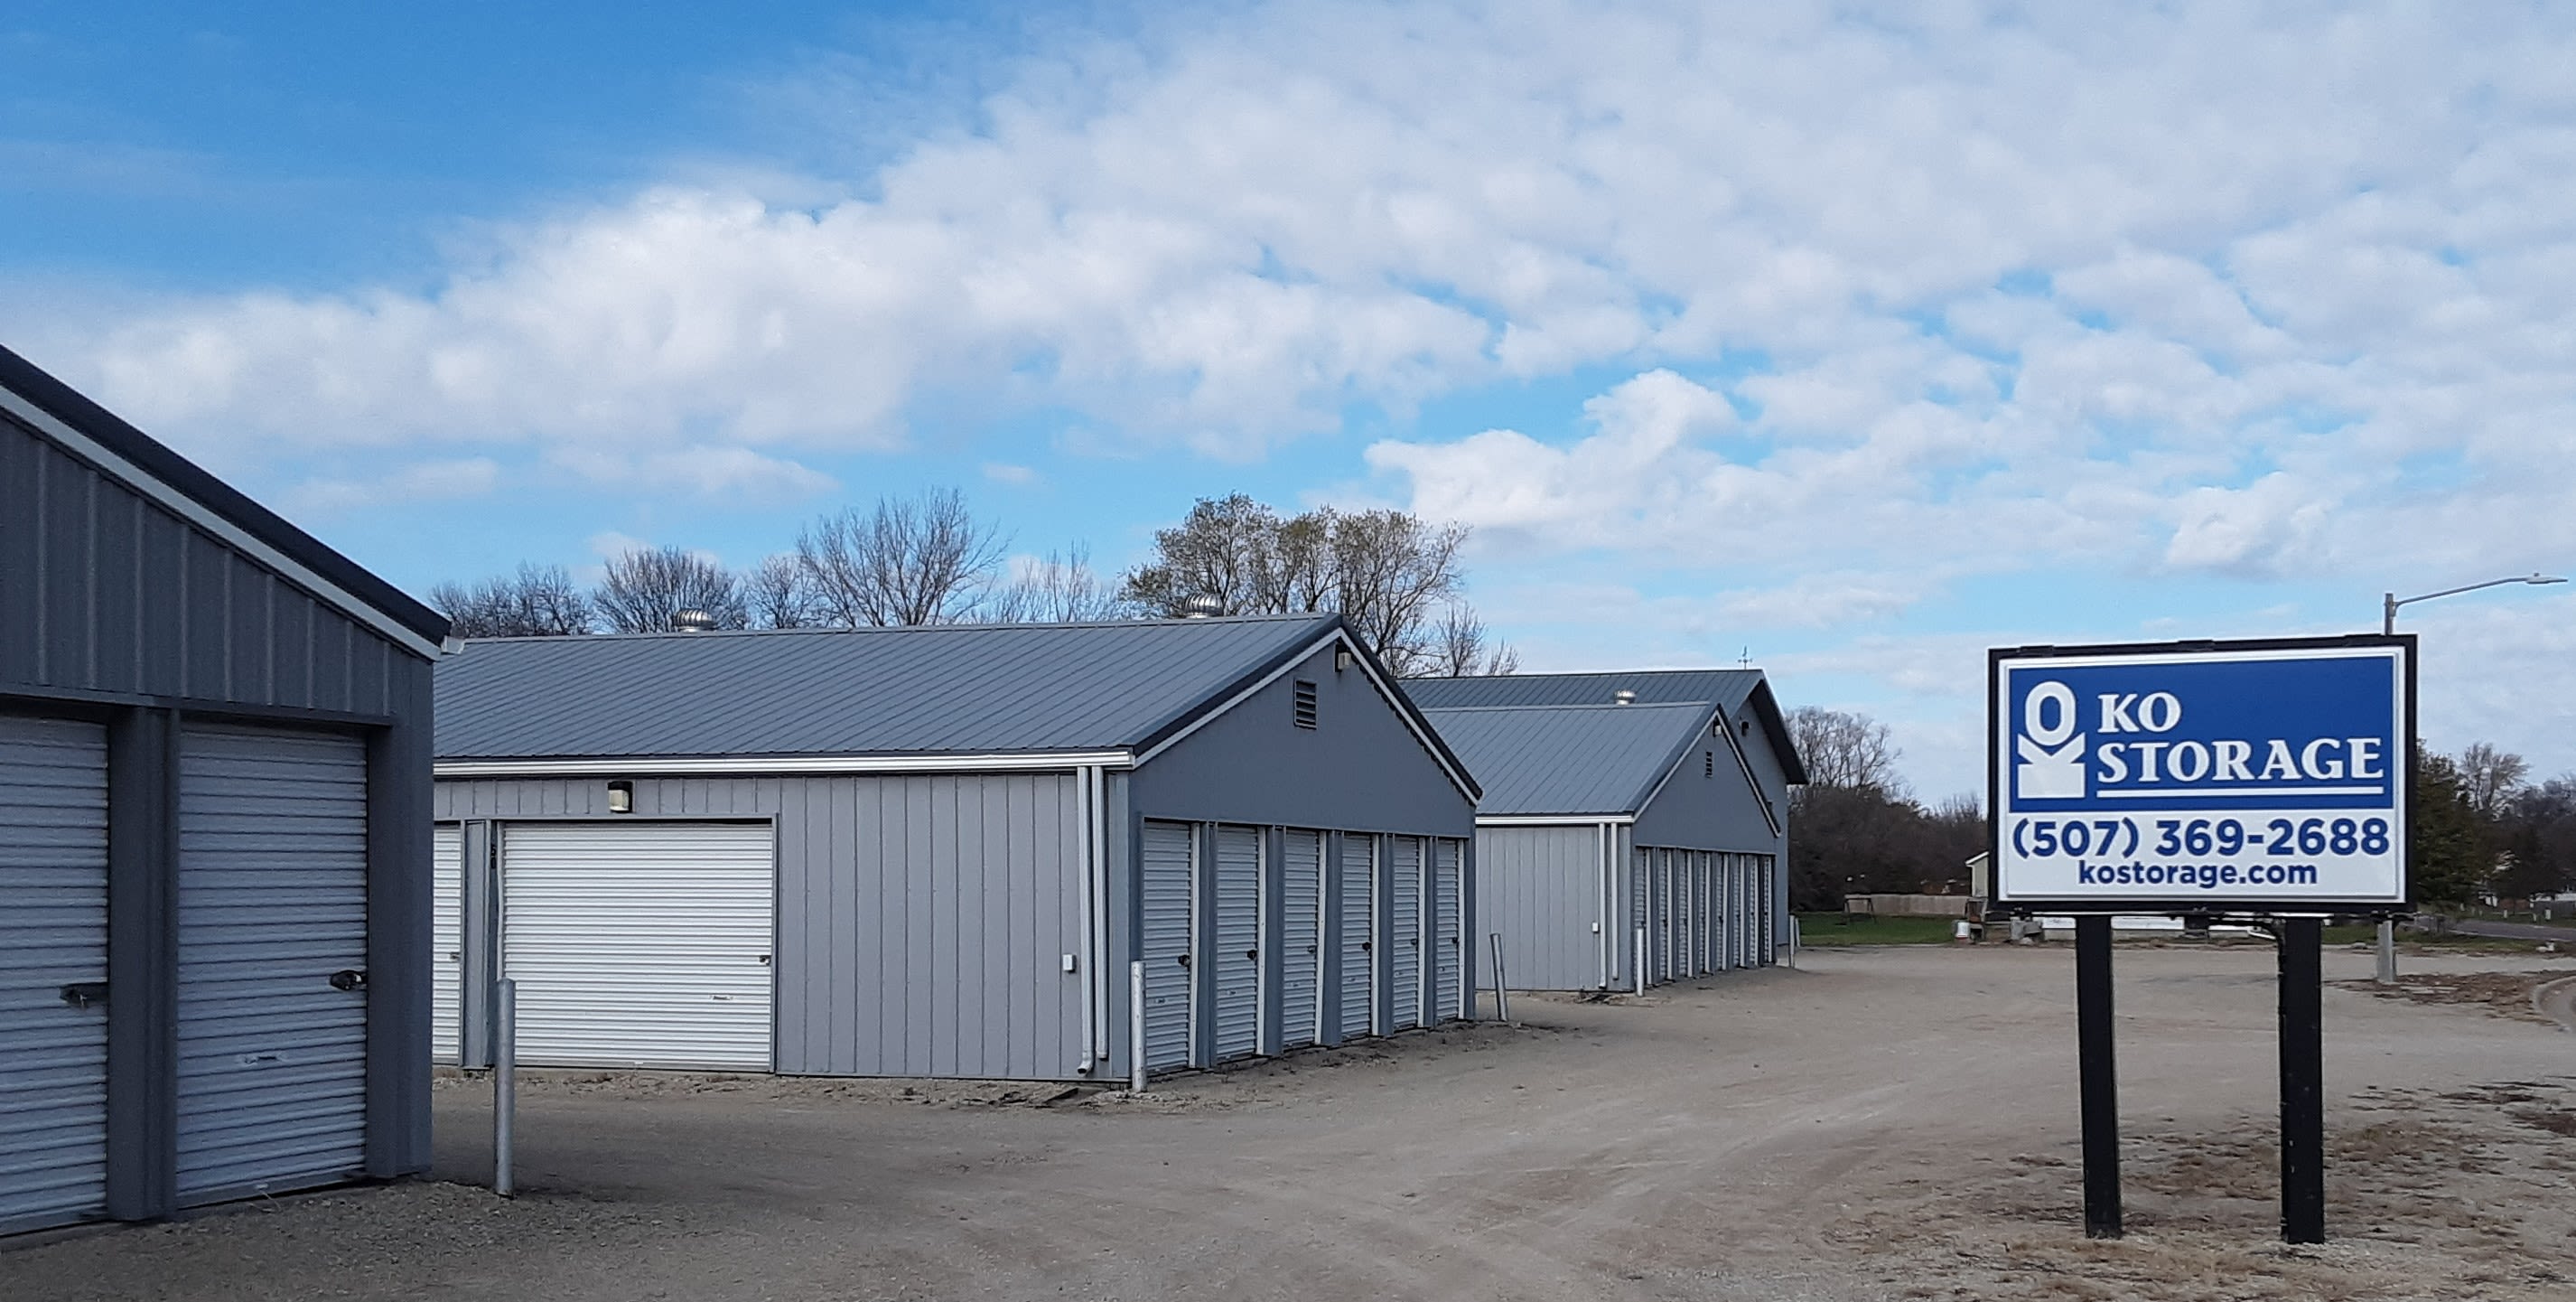 Unit sizes and prices at KO Storage of Waseca 5th St in Waseca, Minnesota